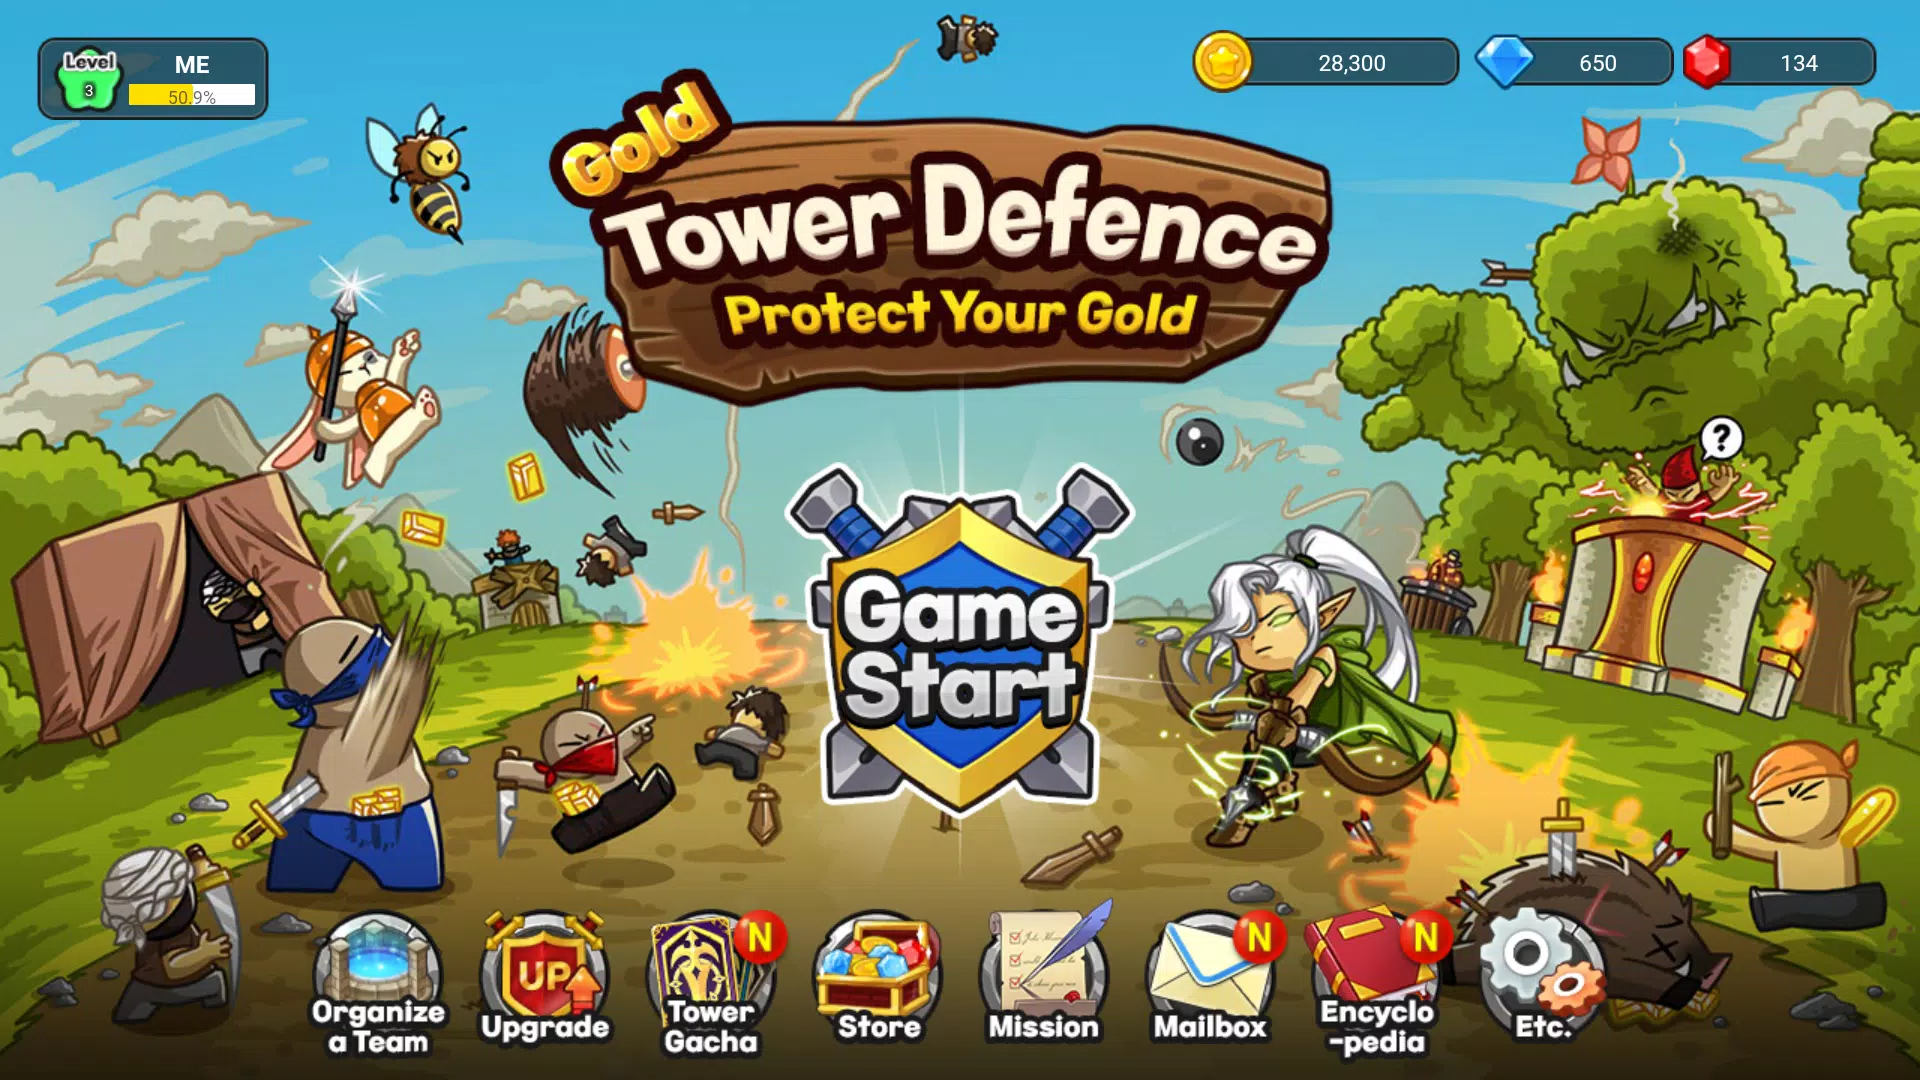 Download Gold Tower Defence Apk 2.1.0 for Android, IOS